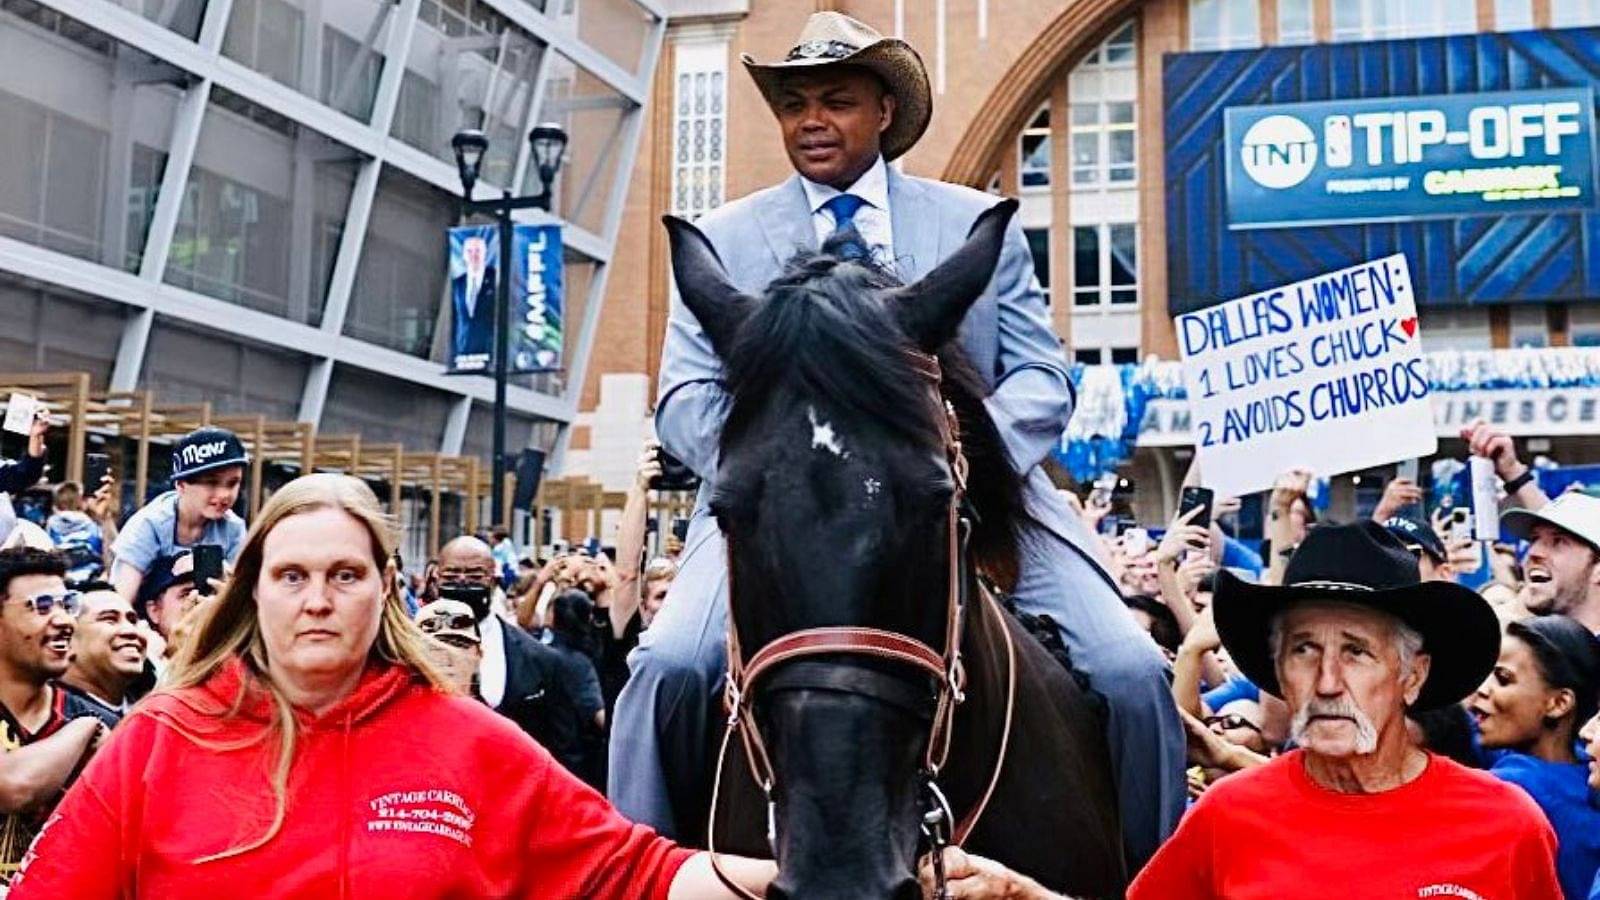 "Charles Barkley cannot ride a horse, I don’t believe it, an elephant? Maybe": Shaquille O'Neal and NBA Twitter went in denial watching Chuck ride a horse in Dallas